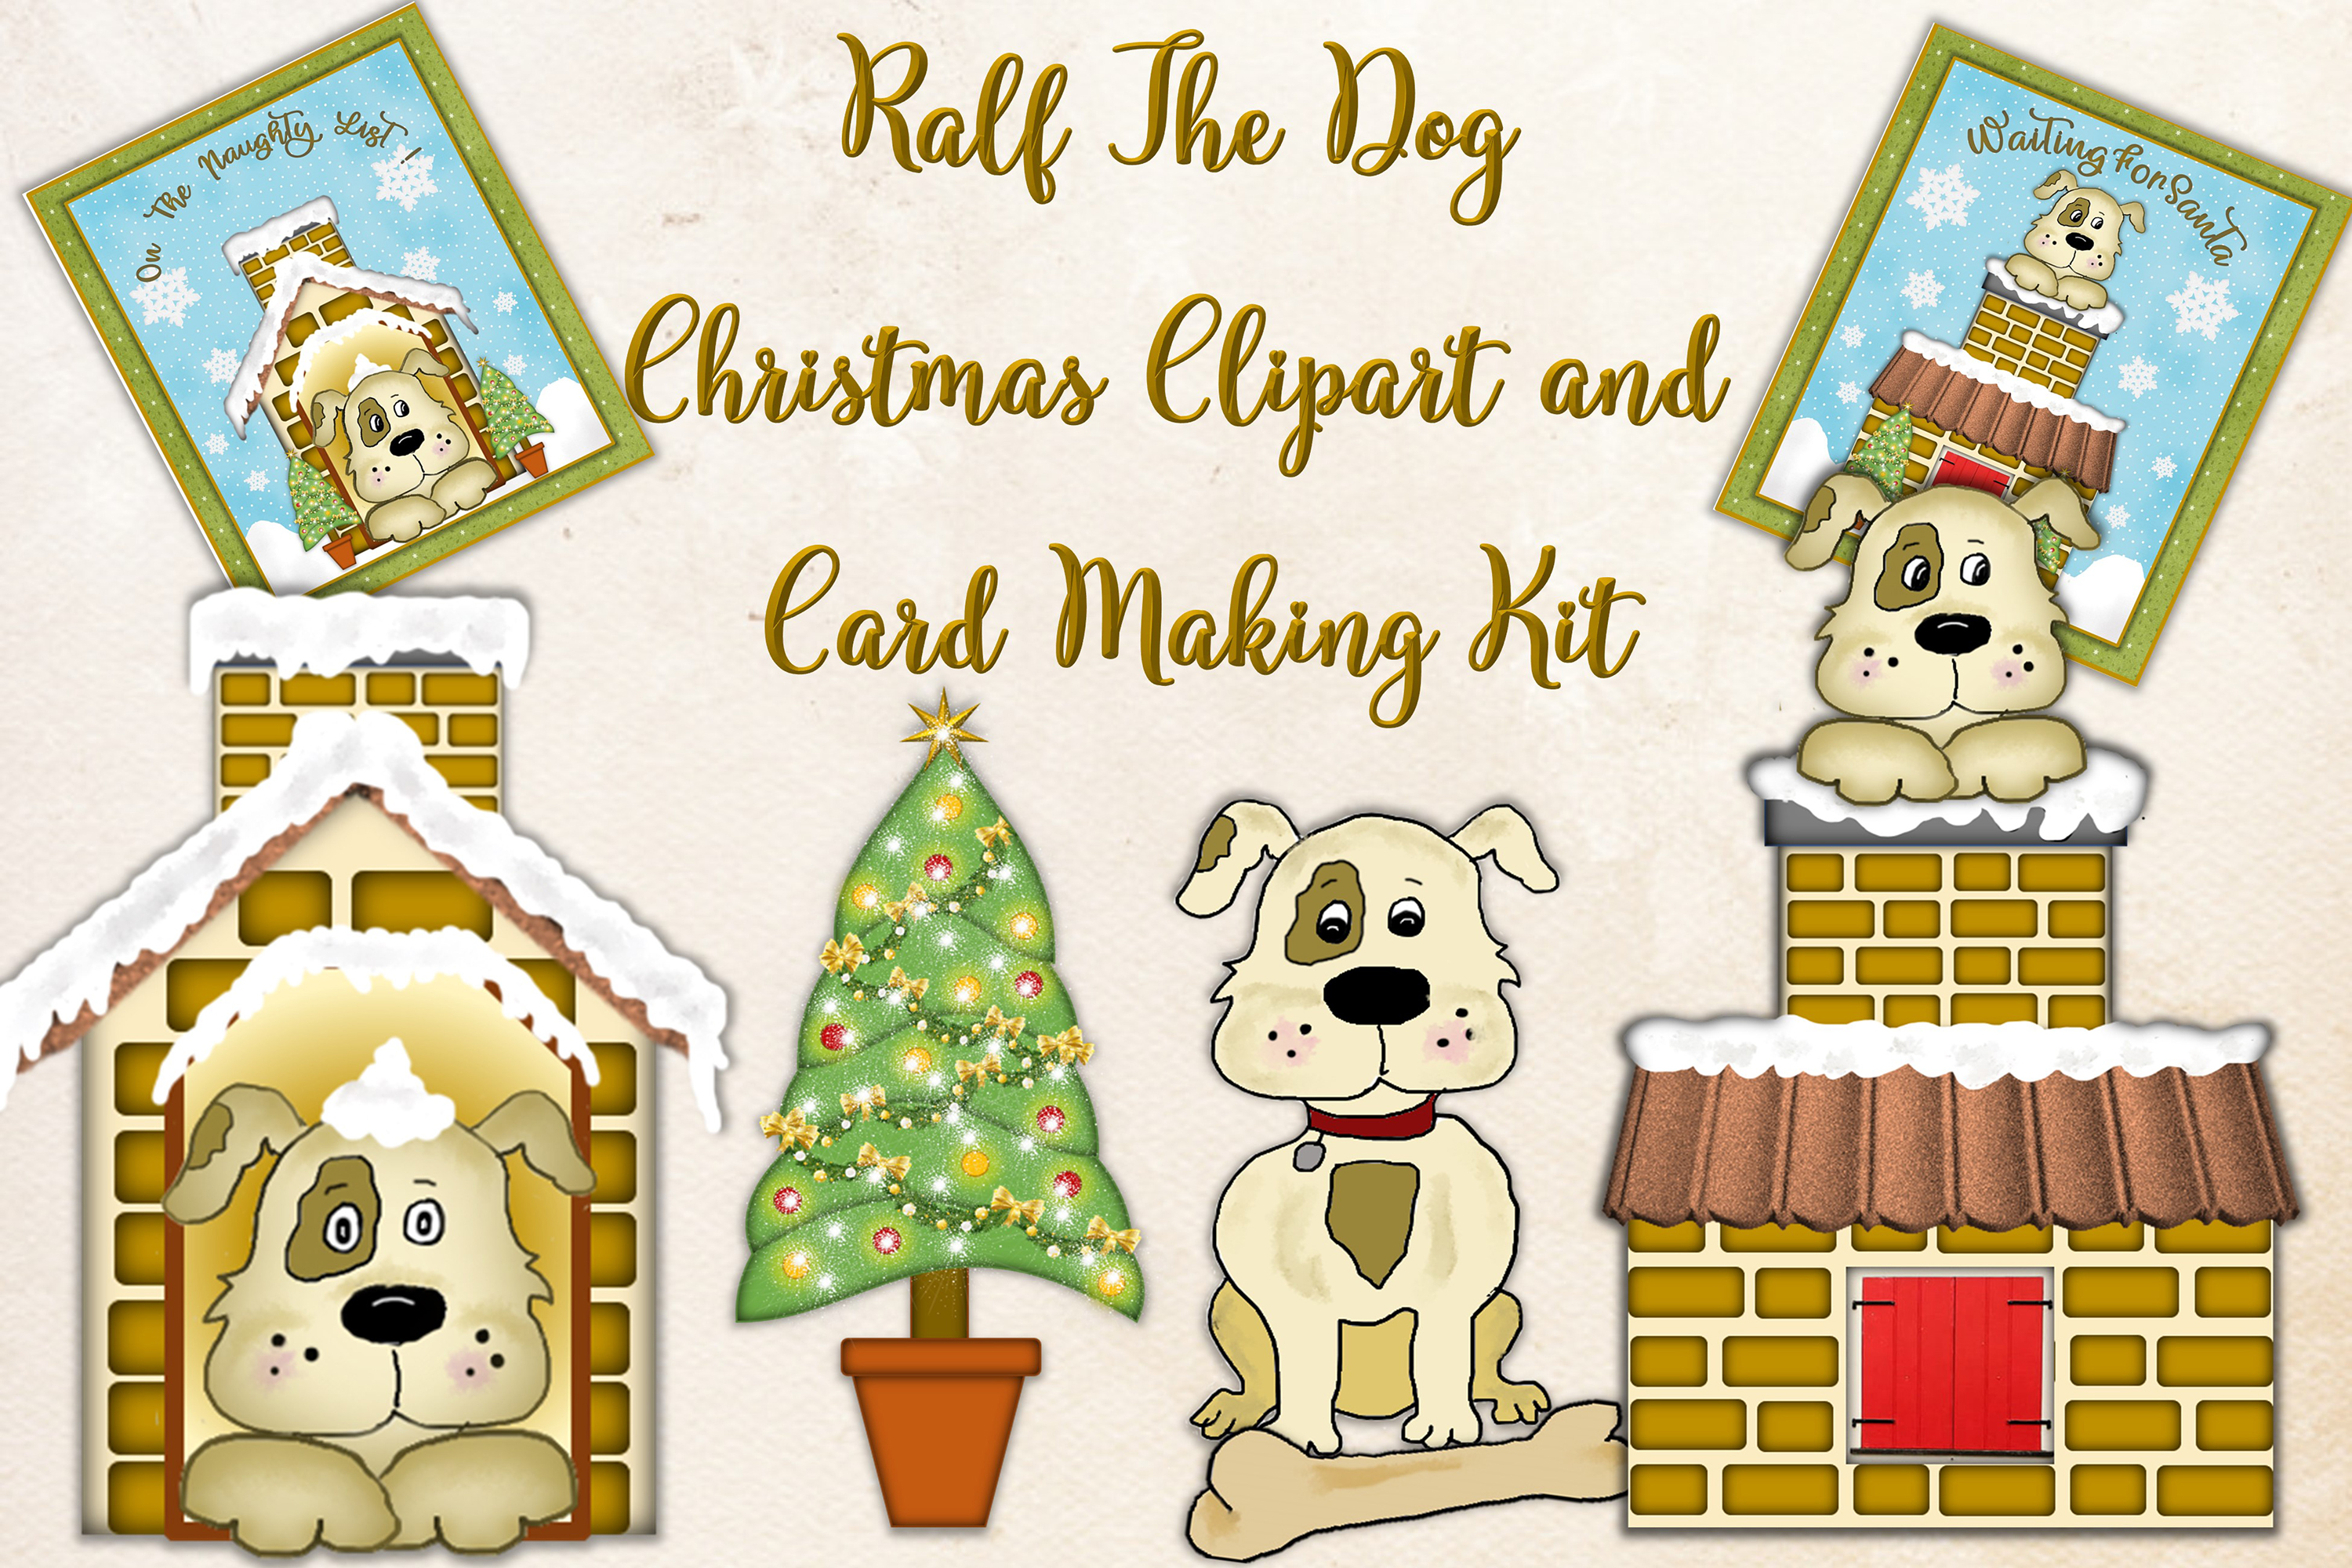 Cute Dog clipart and Christmas Card making Kit.